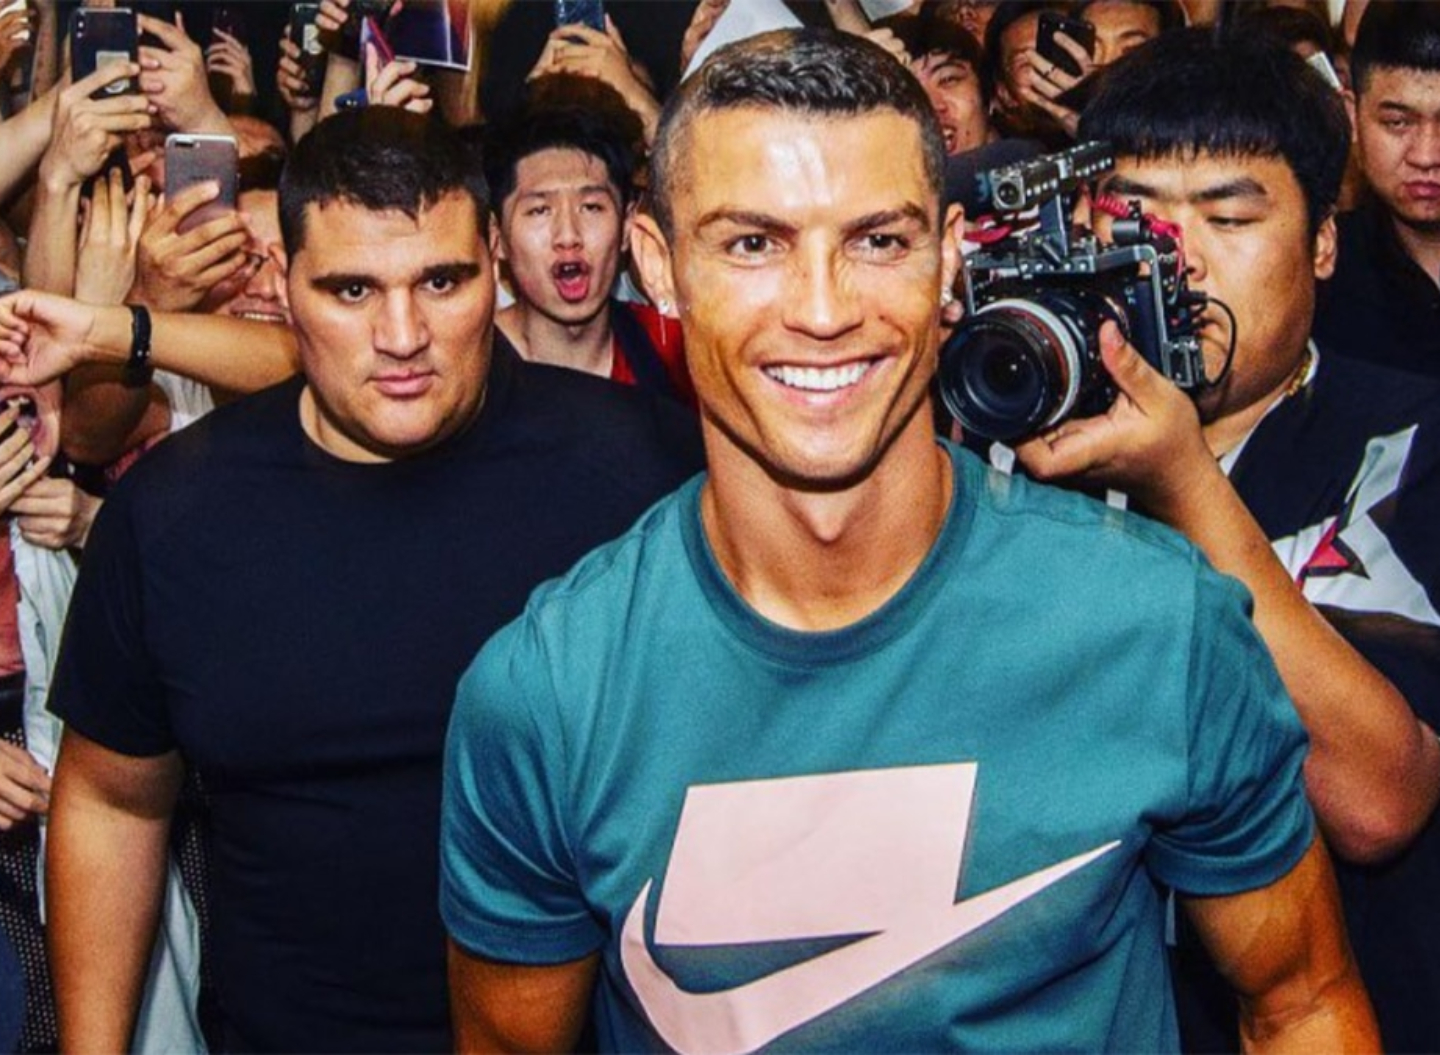 Cristiano Ronaldo’s security guard is a former mixed martial arts fighter